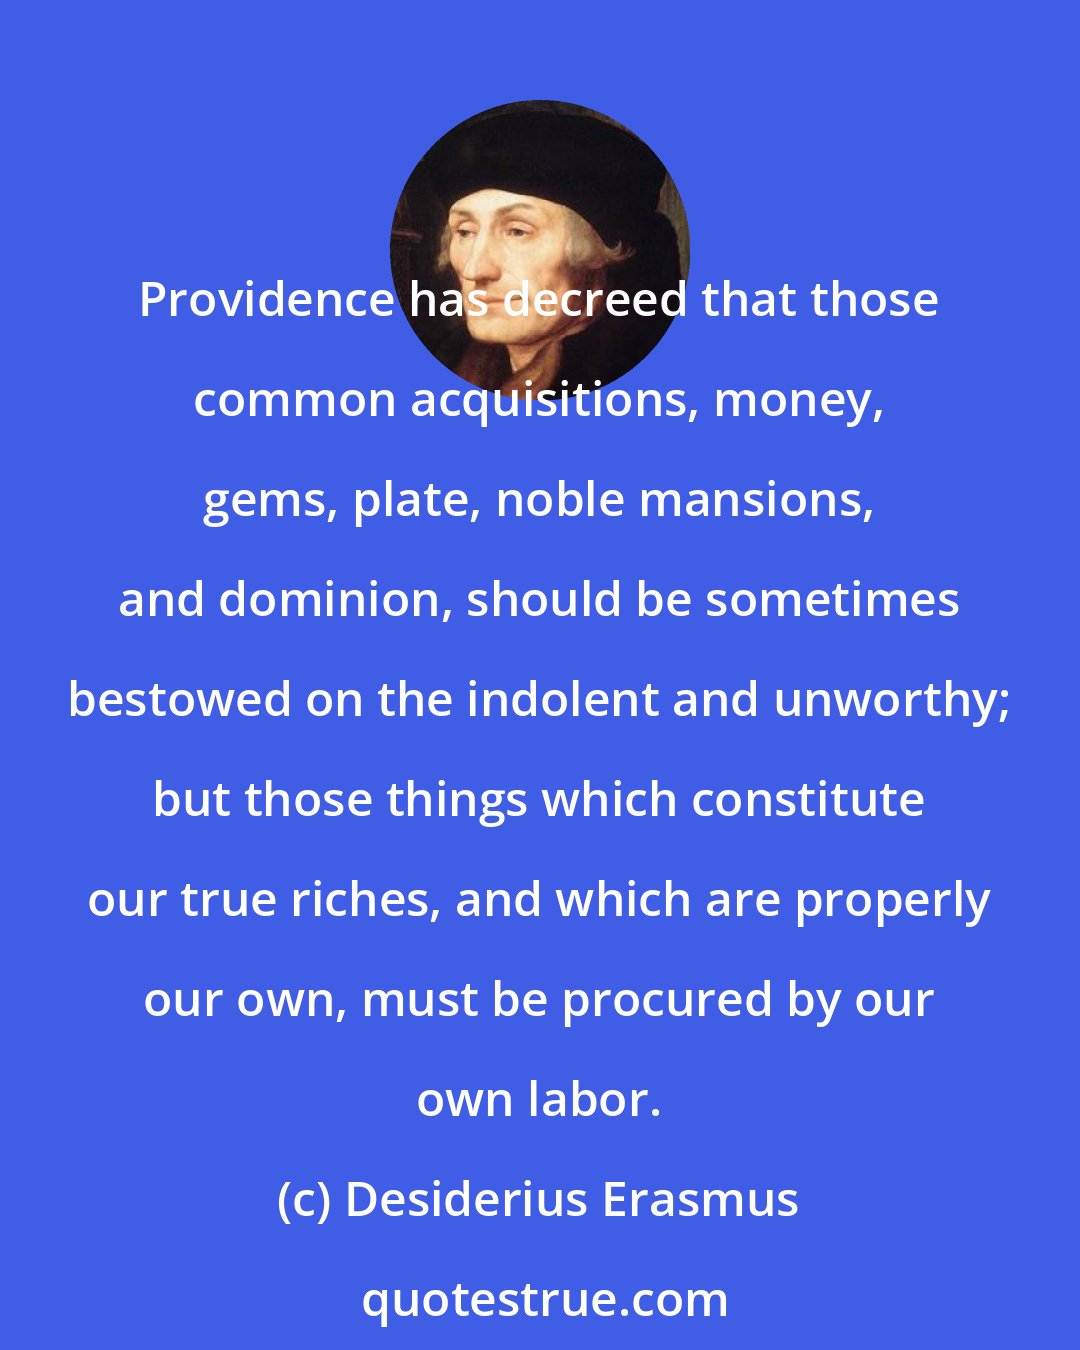 Desiderius Erasmus: Providence has decreed that those common acquisitions, money, gems, plate, noble mansions, and dominion, should be sometimes bestowed on the indolent and unworthy; but those things which constitute our true riches, and which are properly our own, must be procured by our own labor.